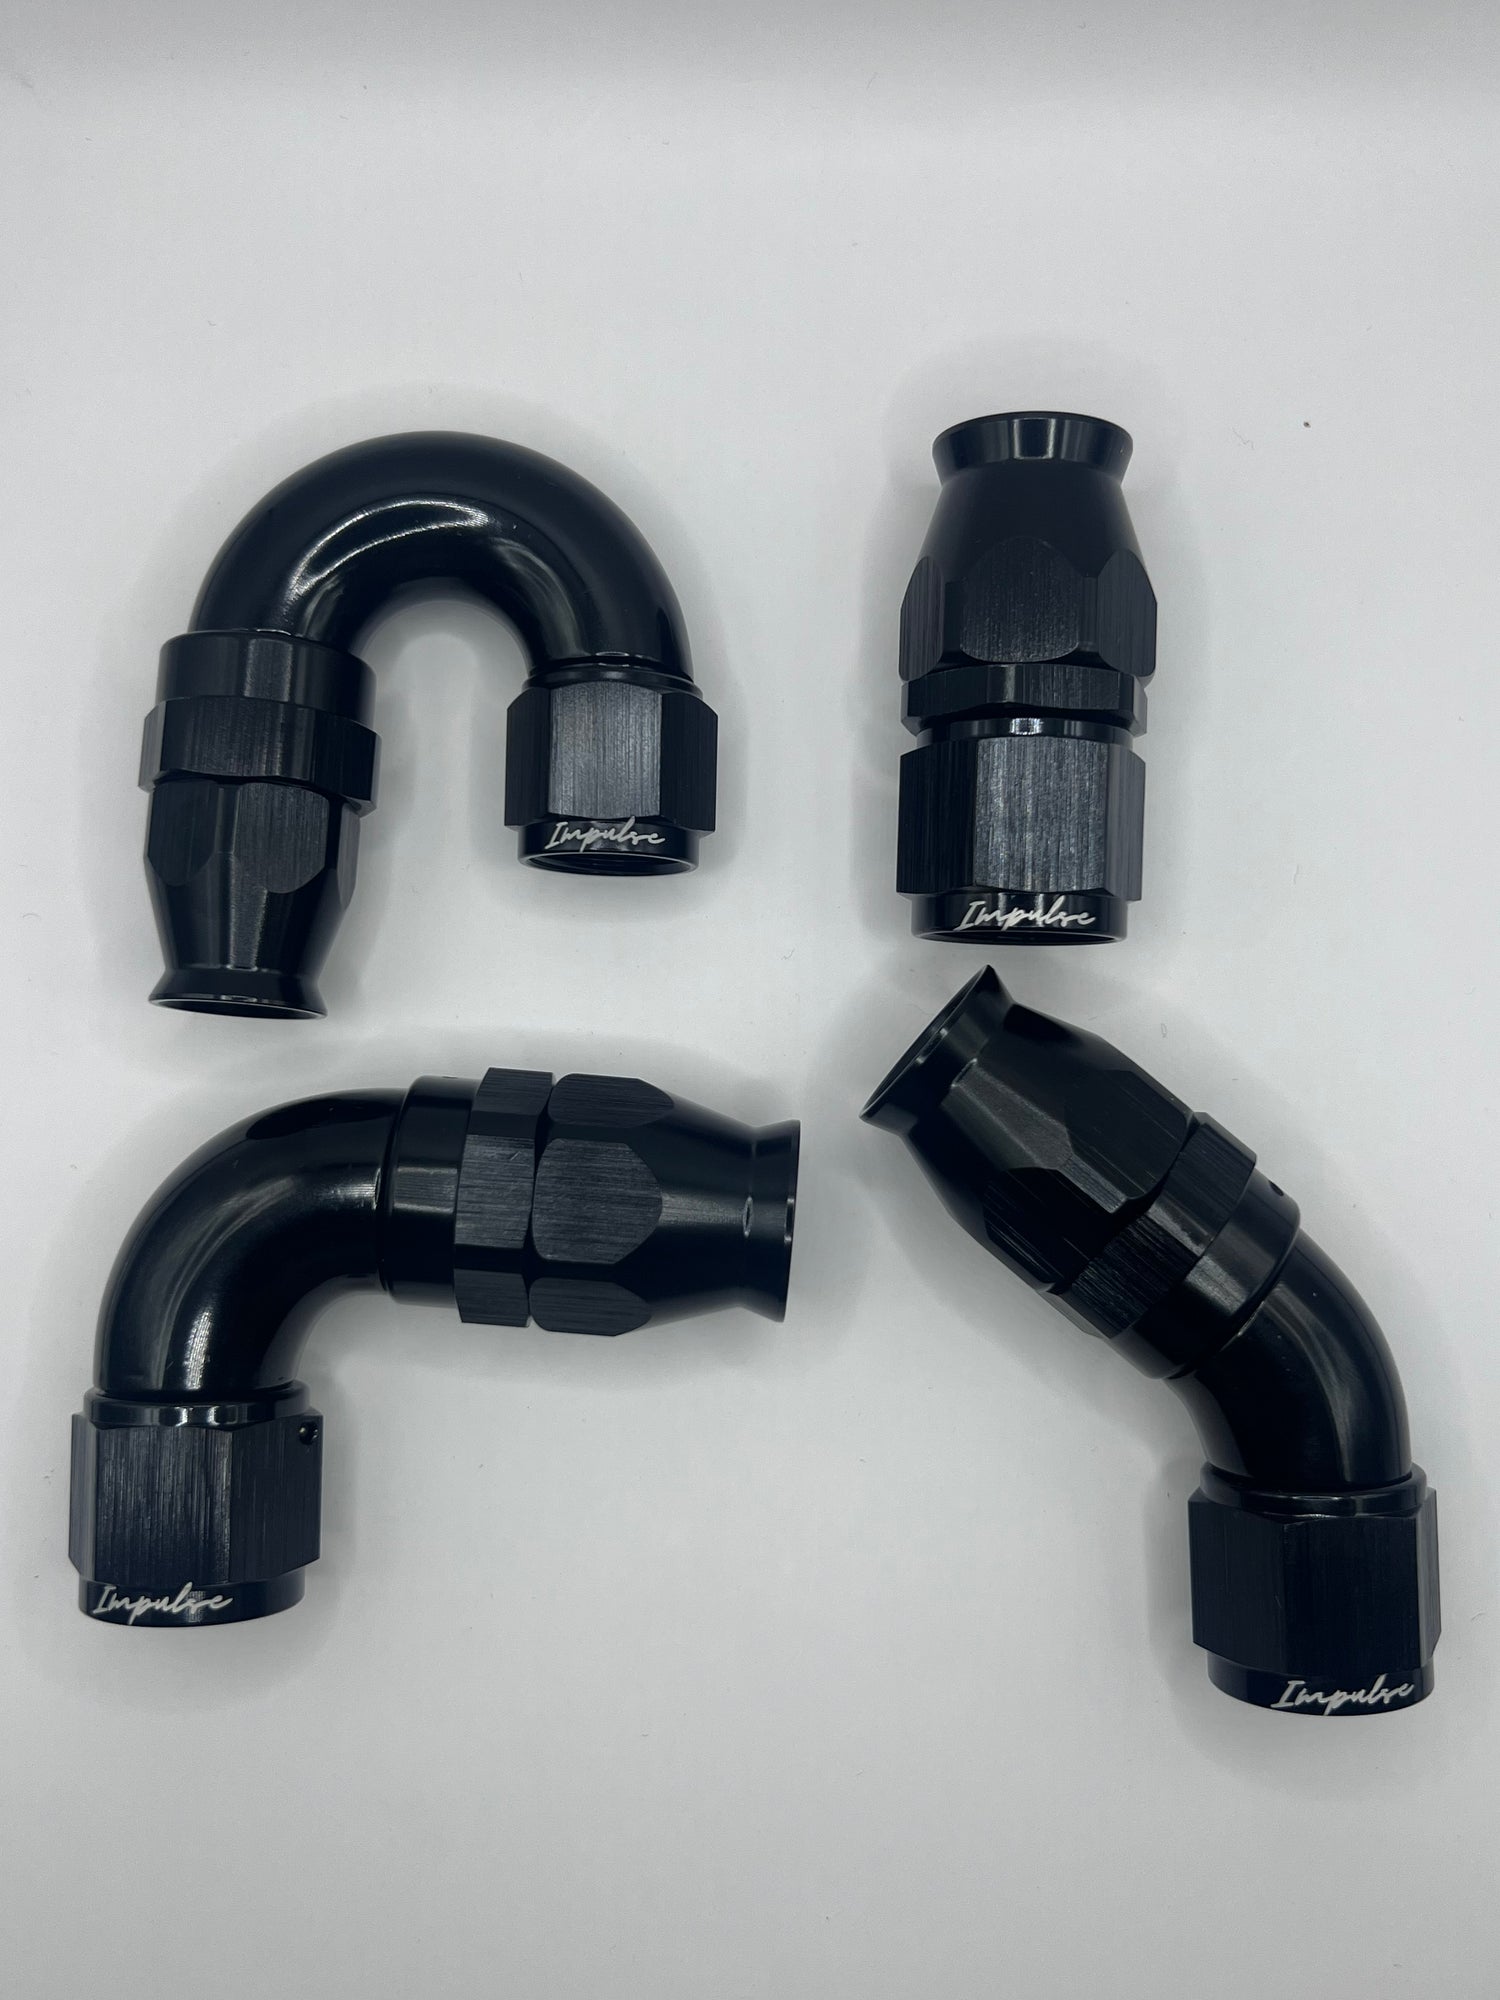 PTFE Fittings